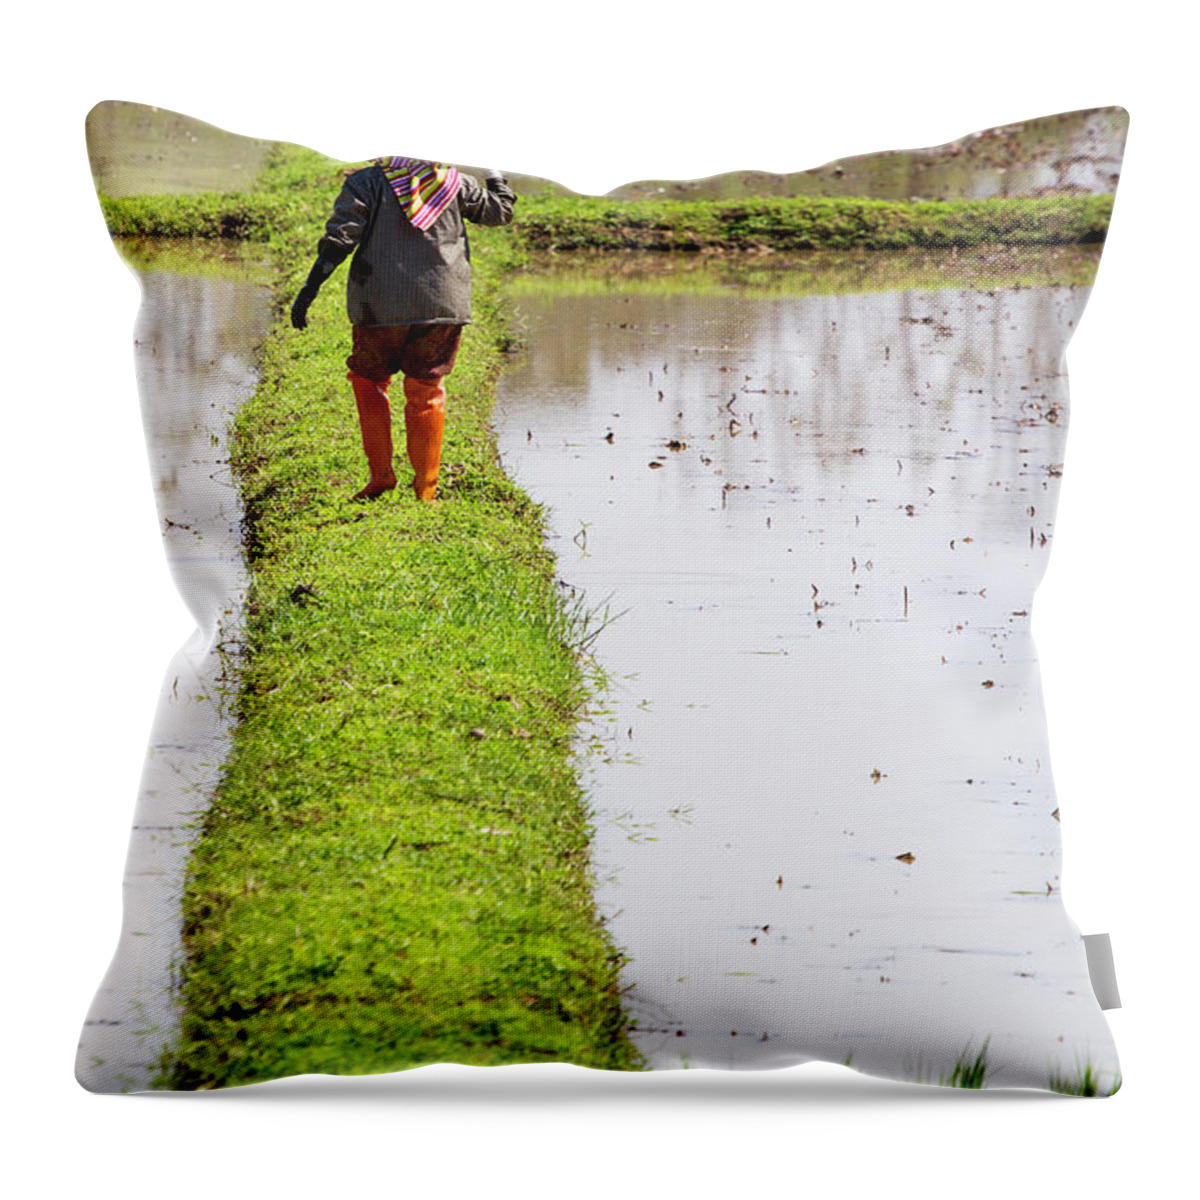 People Throw Pillow featuring the photograph Chiangrai_farmer On A Rice Field by Jean-claude Soboul